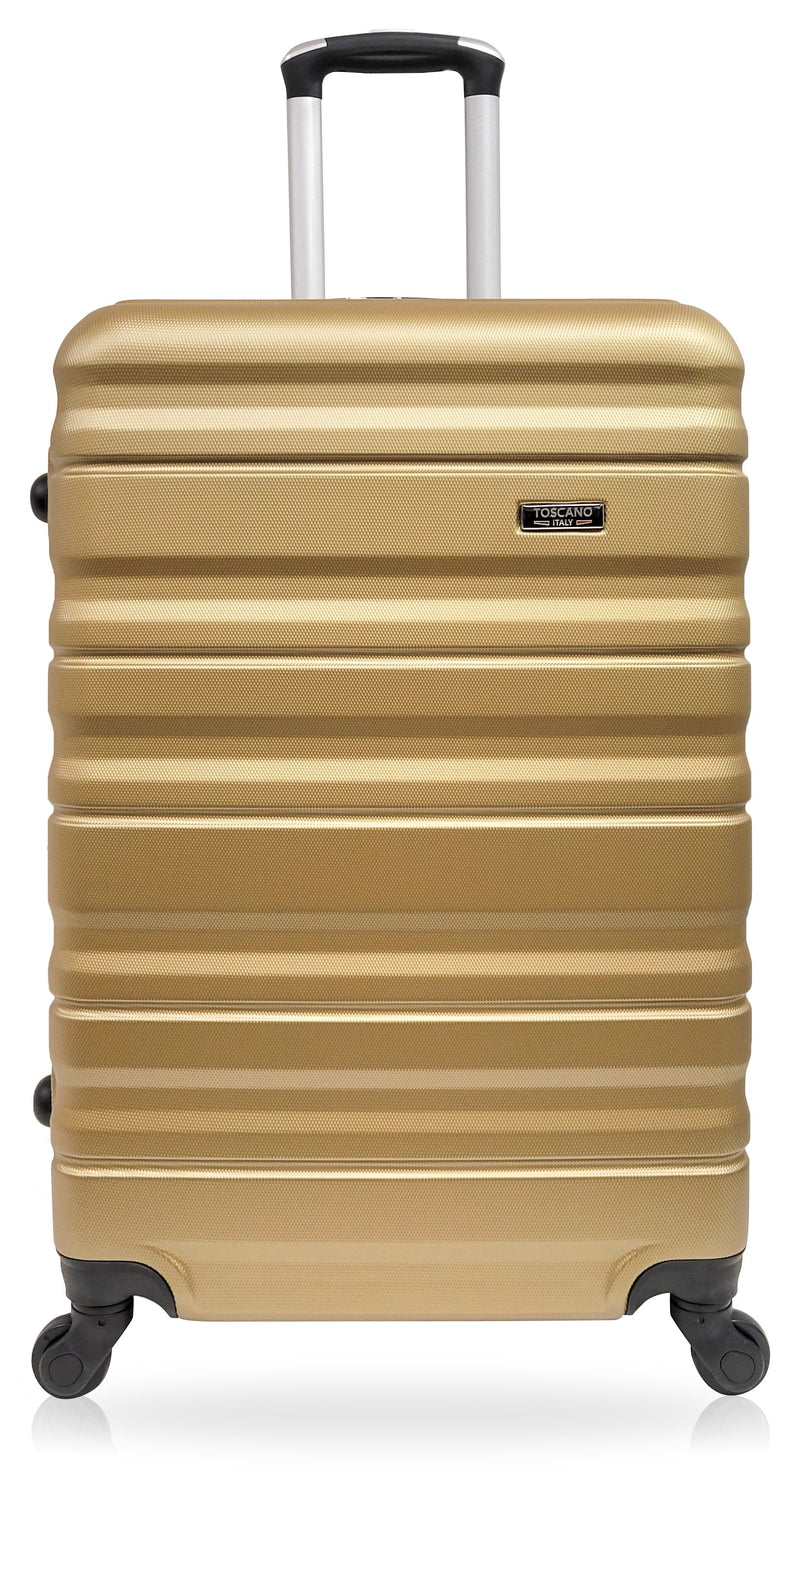 TOSCANO by Tucci Barre (18", 22", 26", 30") Lightweight Spinner Luggage Suitcase Set